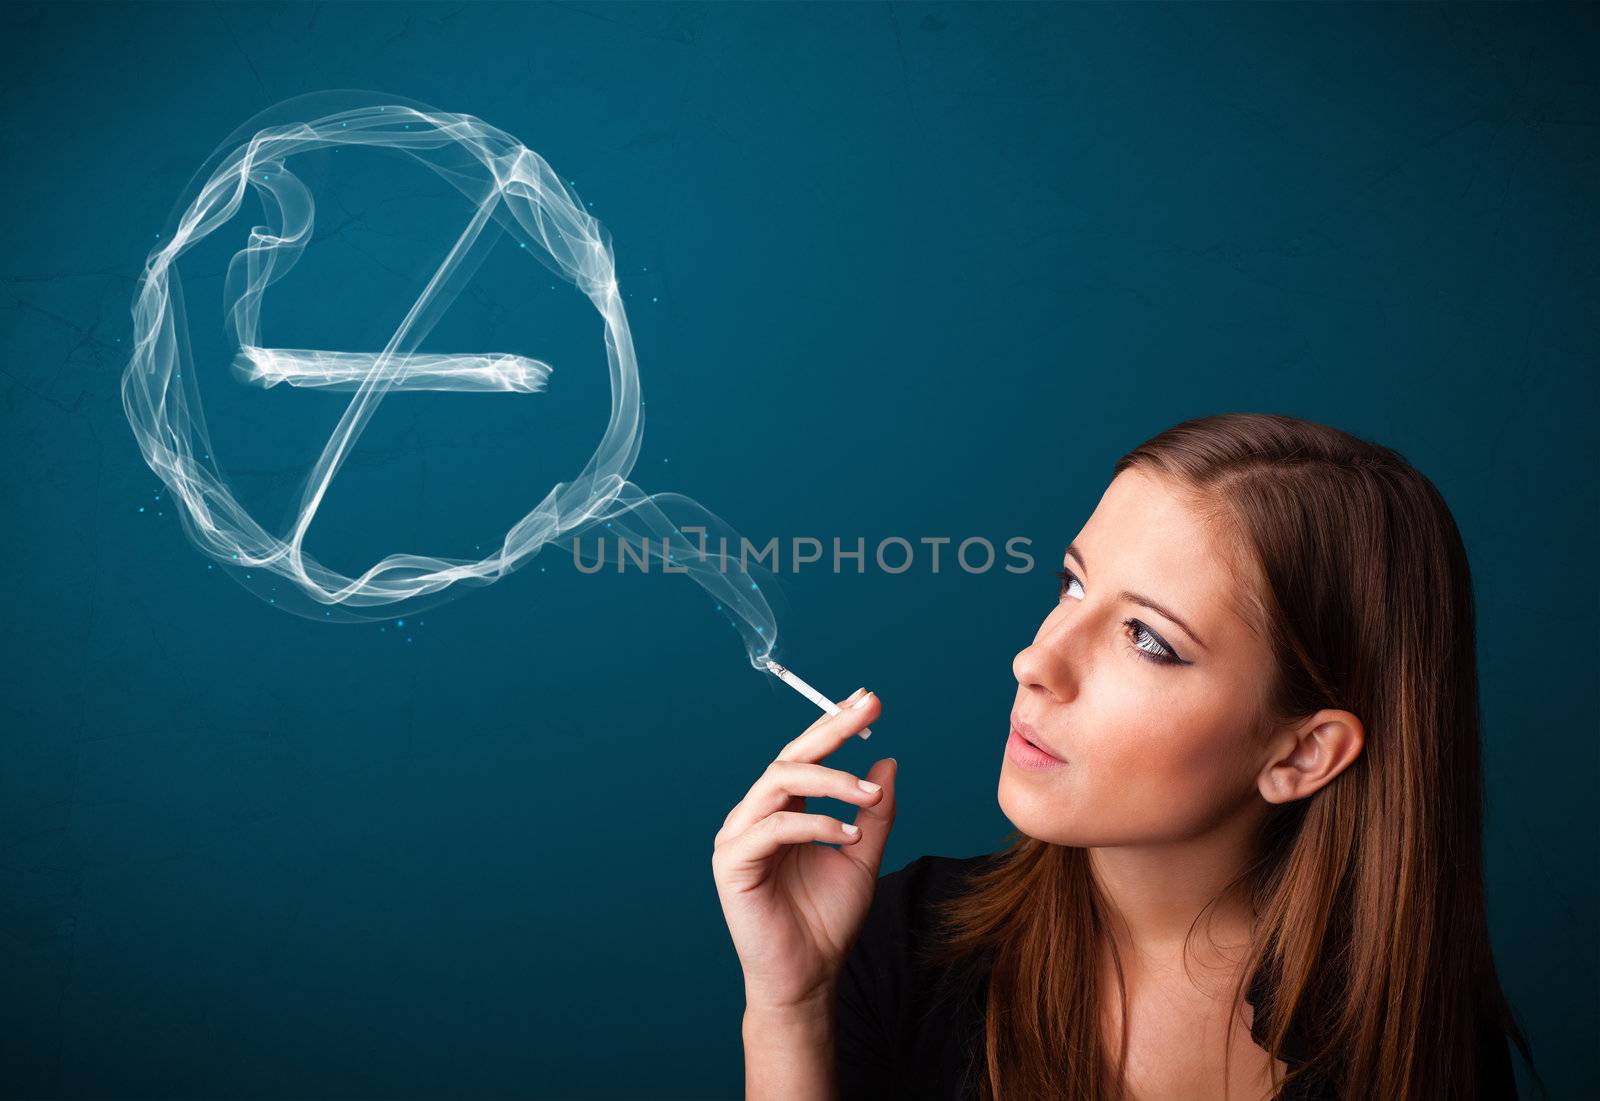 Pretty young lady smoking unheathy cigarette with no smoking sign